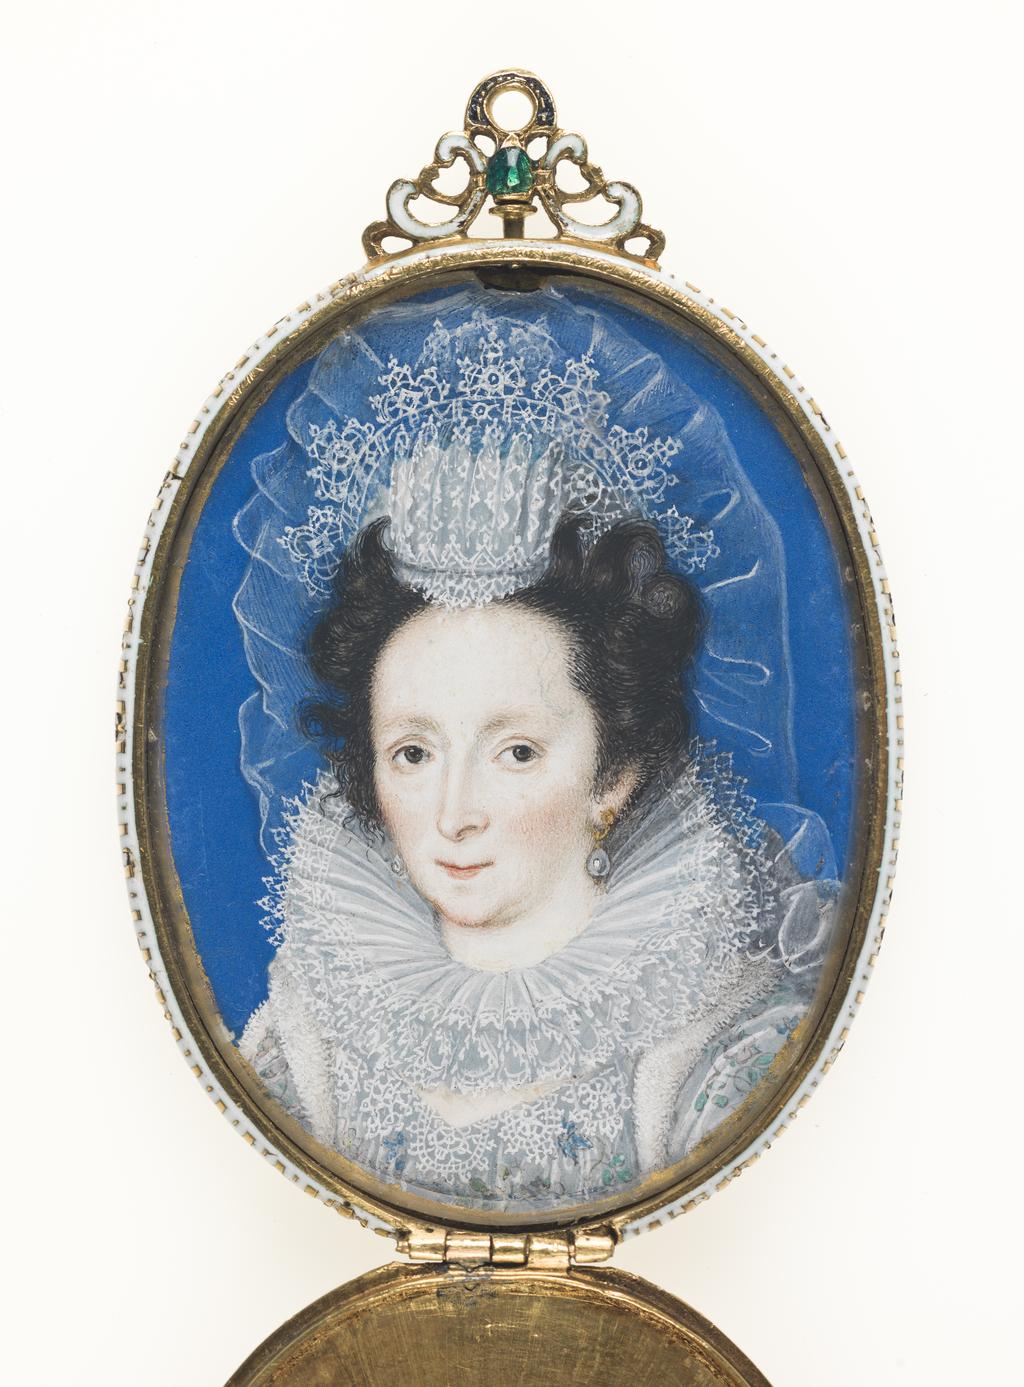 An image of Elizabeth, Countess of Rutland 1585-1612. Oliver, Isaac I (school of, British, c.1556-1617). Watercolour on vellum on card, height 54 mm, width 42 mm, circa 1612. Elizabethan.